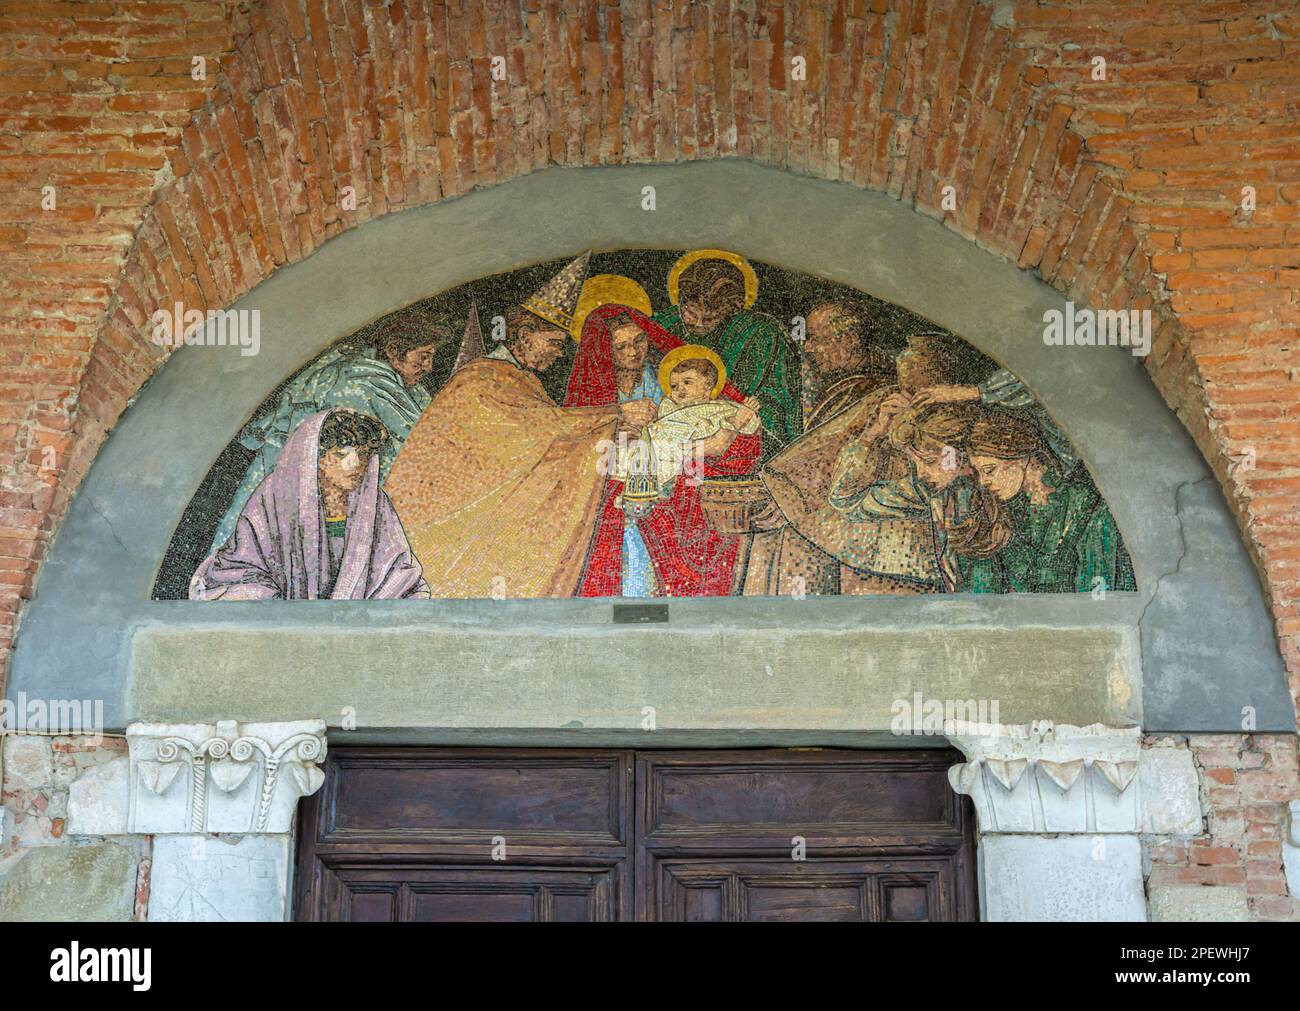 Mosaic facade (adoration of the Magi - 1886) of the ancient church of San Michele Arcangelo in Antraccoli, Capannori,Lucca, Tuscny- Italy Stock Photo